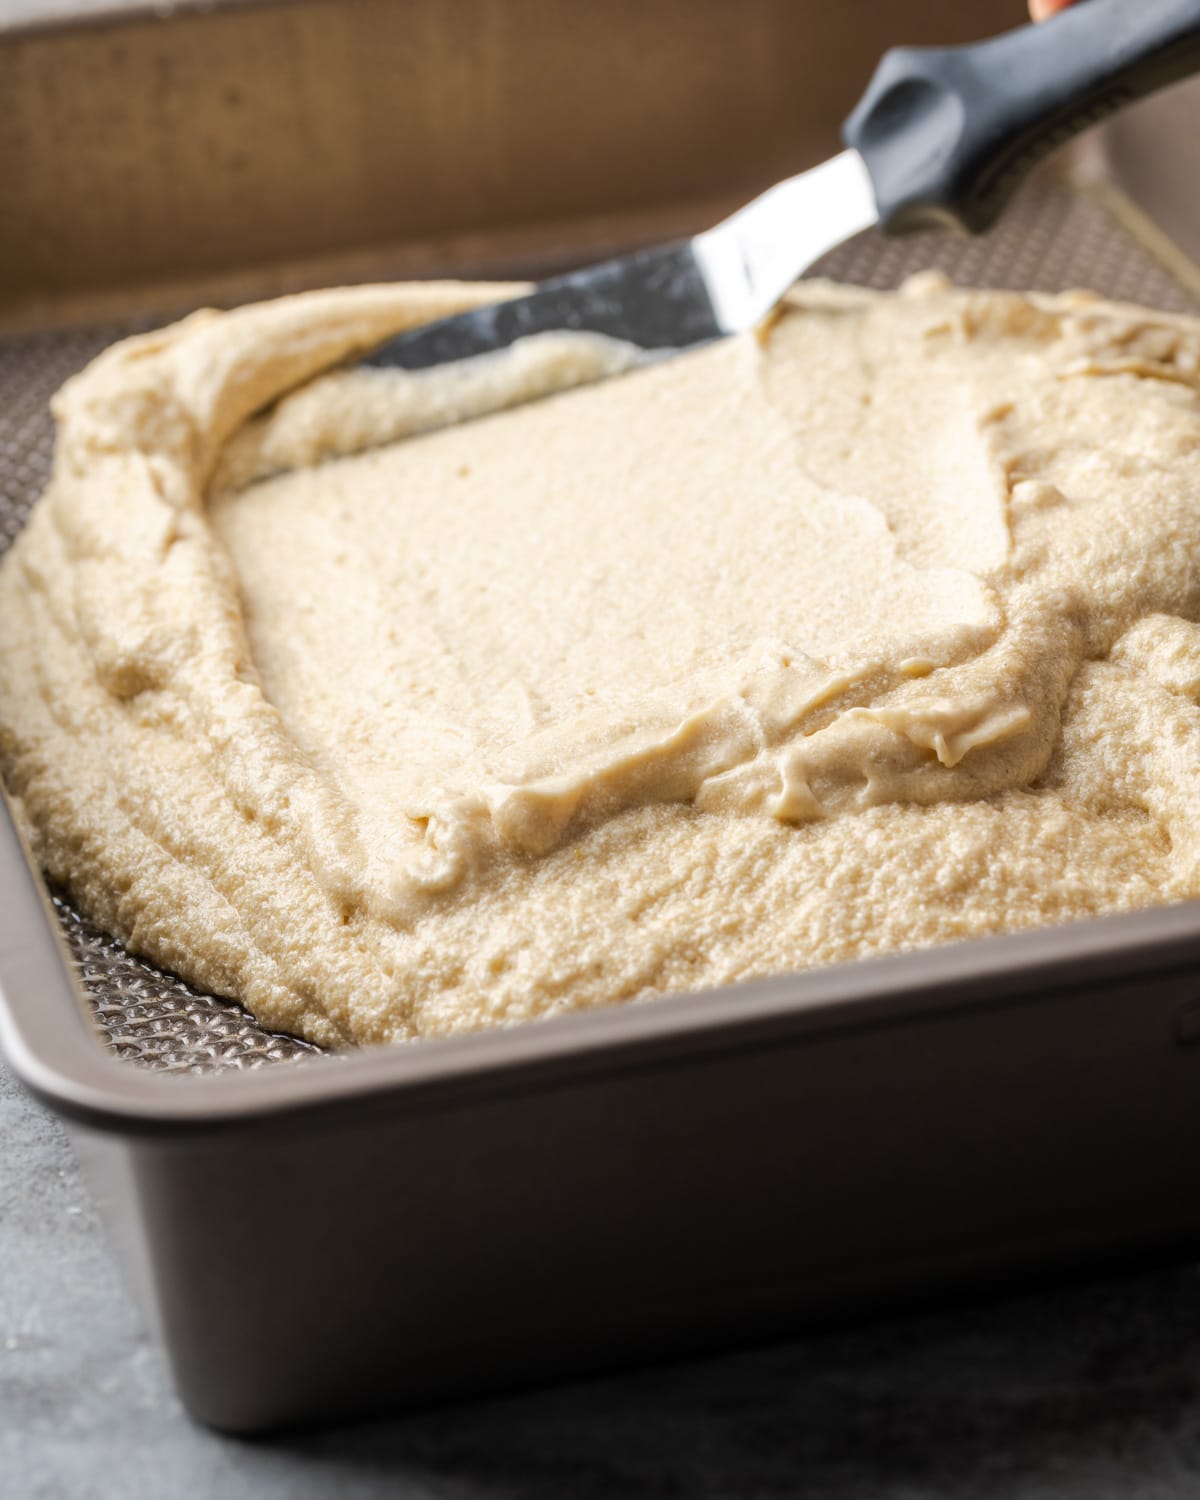 Vanilla cake batter is spread into a baking pan with an offset spatula.